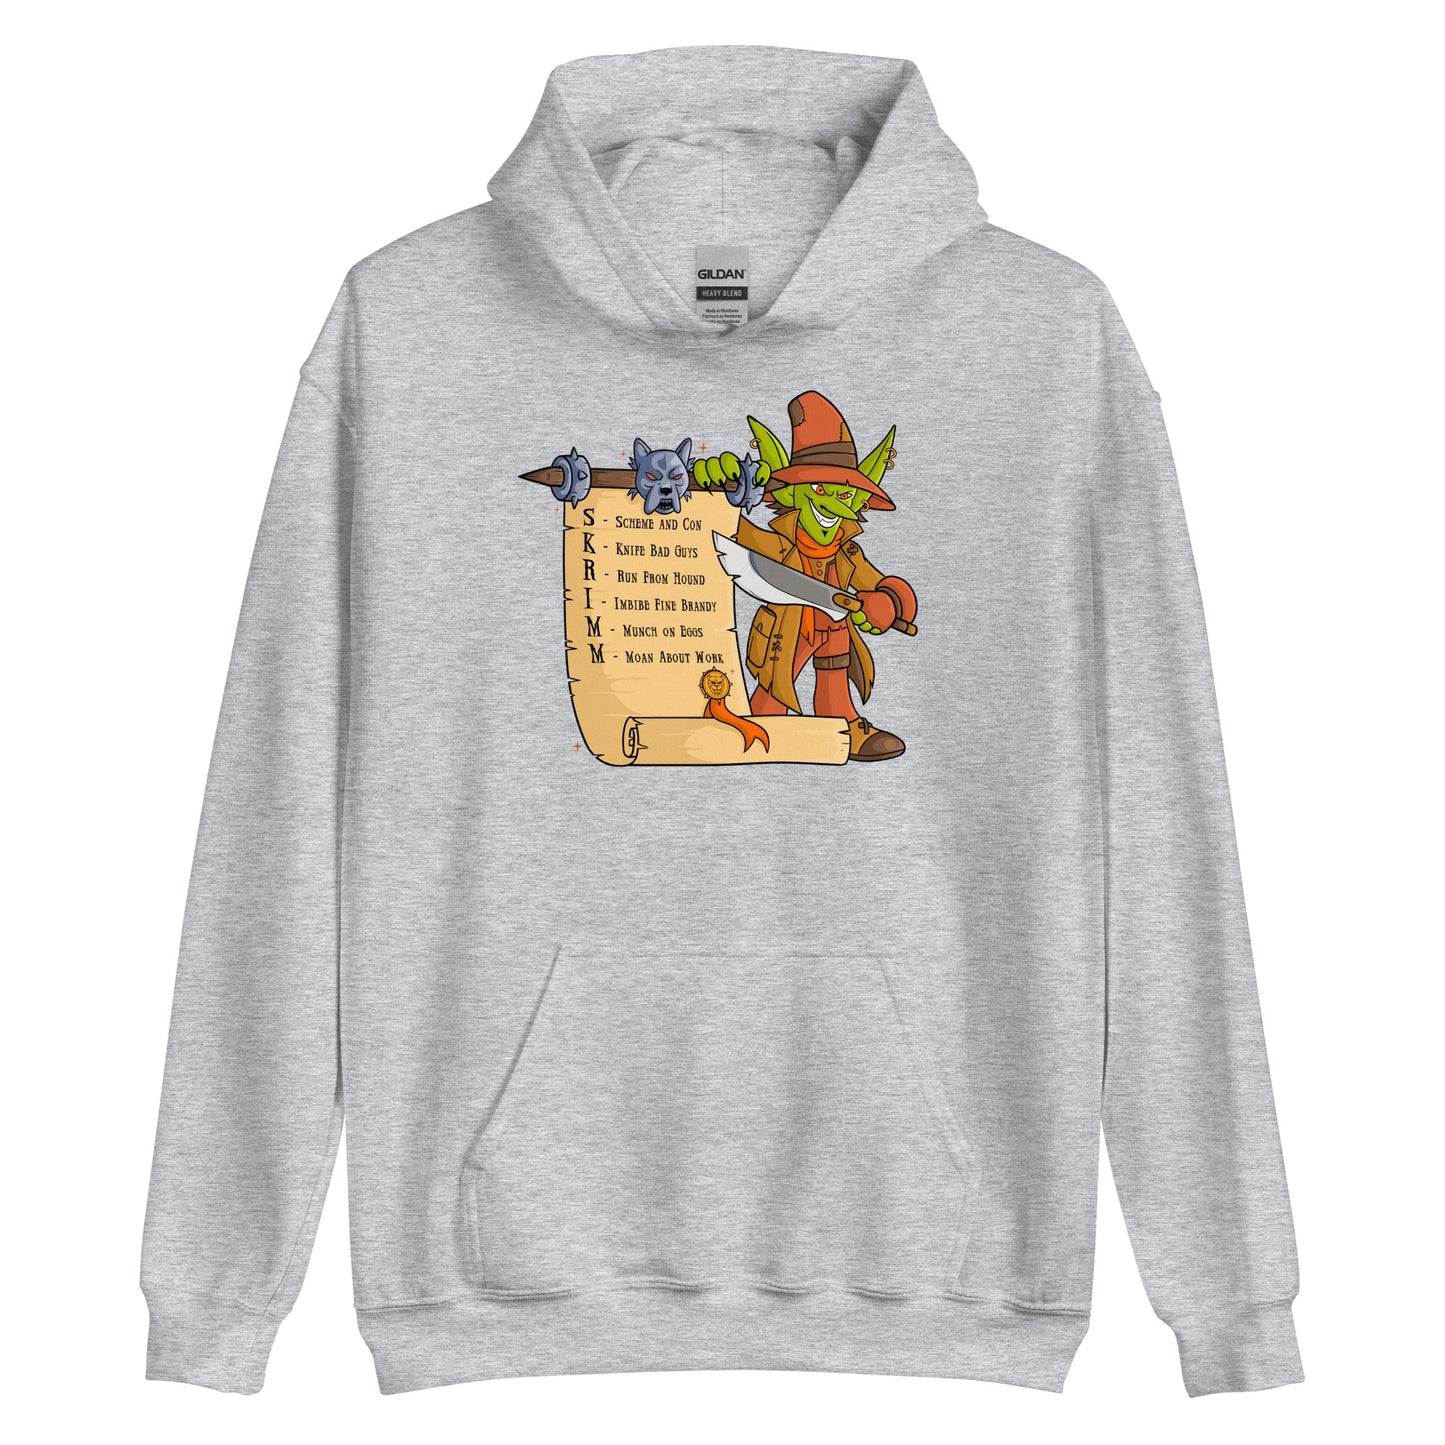 The S.K.R.I.M.M. System - Hoodie